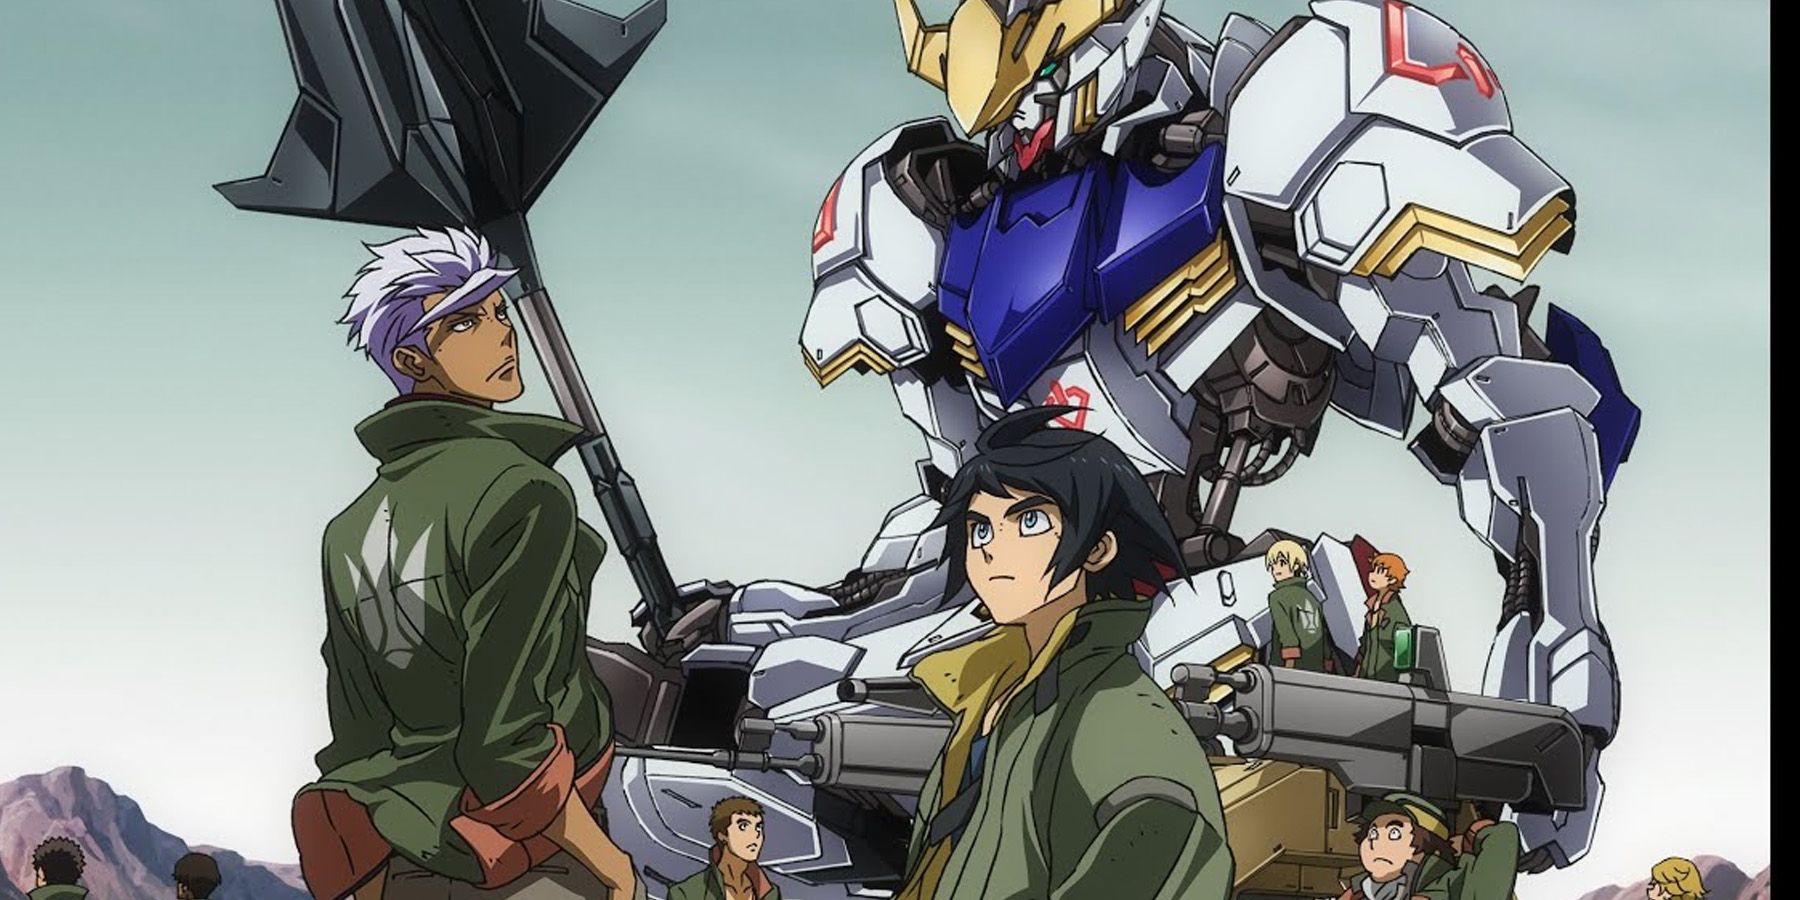 Iron Blooded Orphans main characters